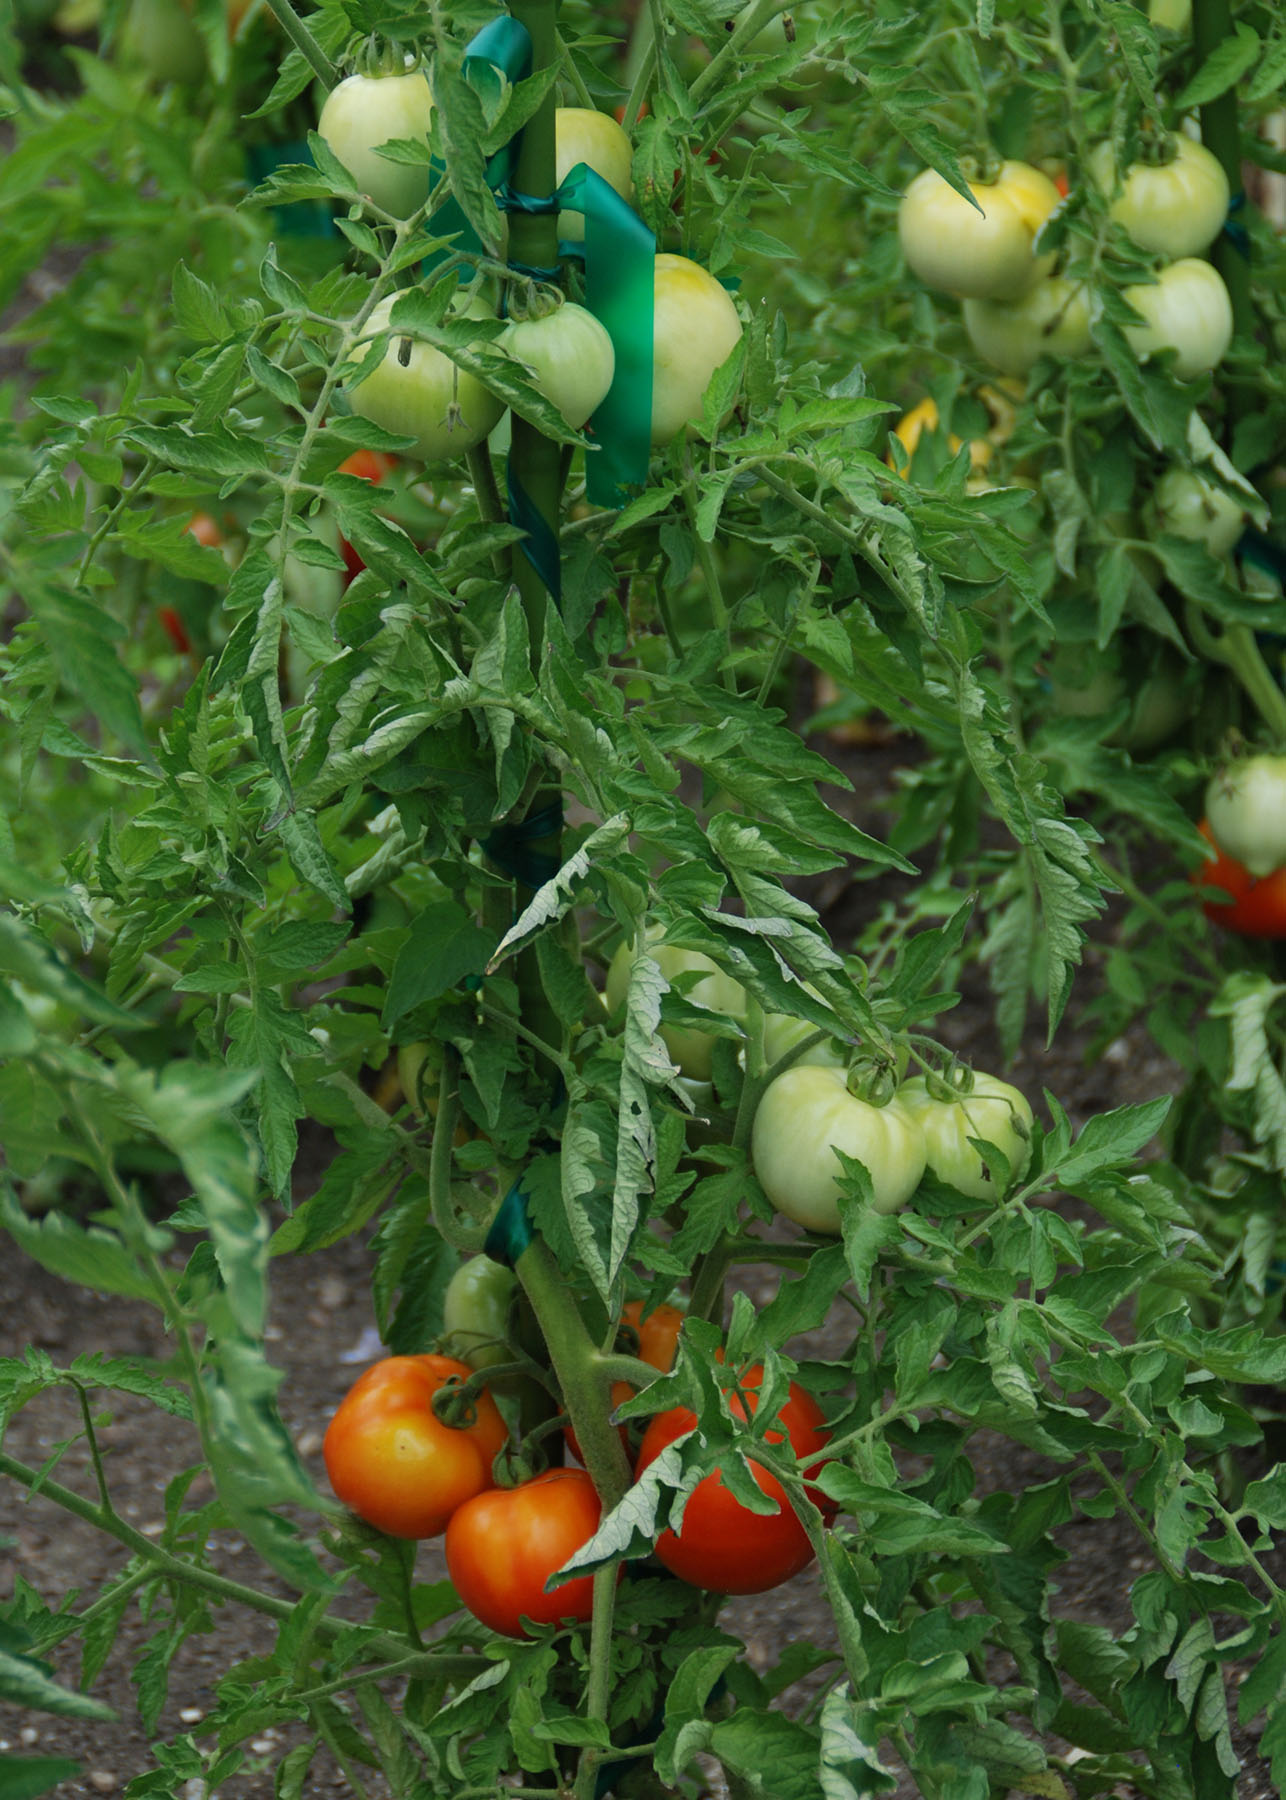 Tie-Dye tomatoes ready to harvest